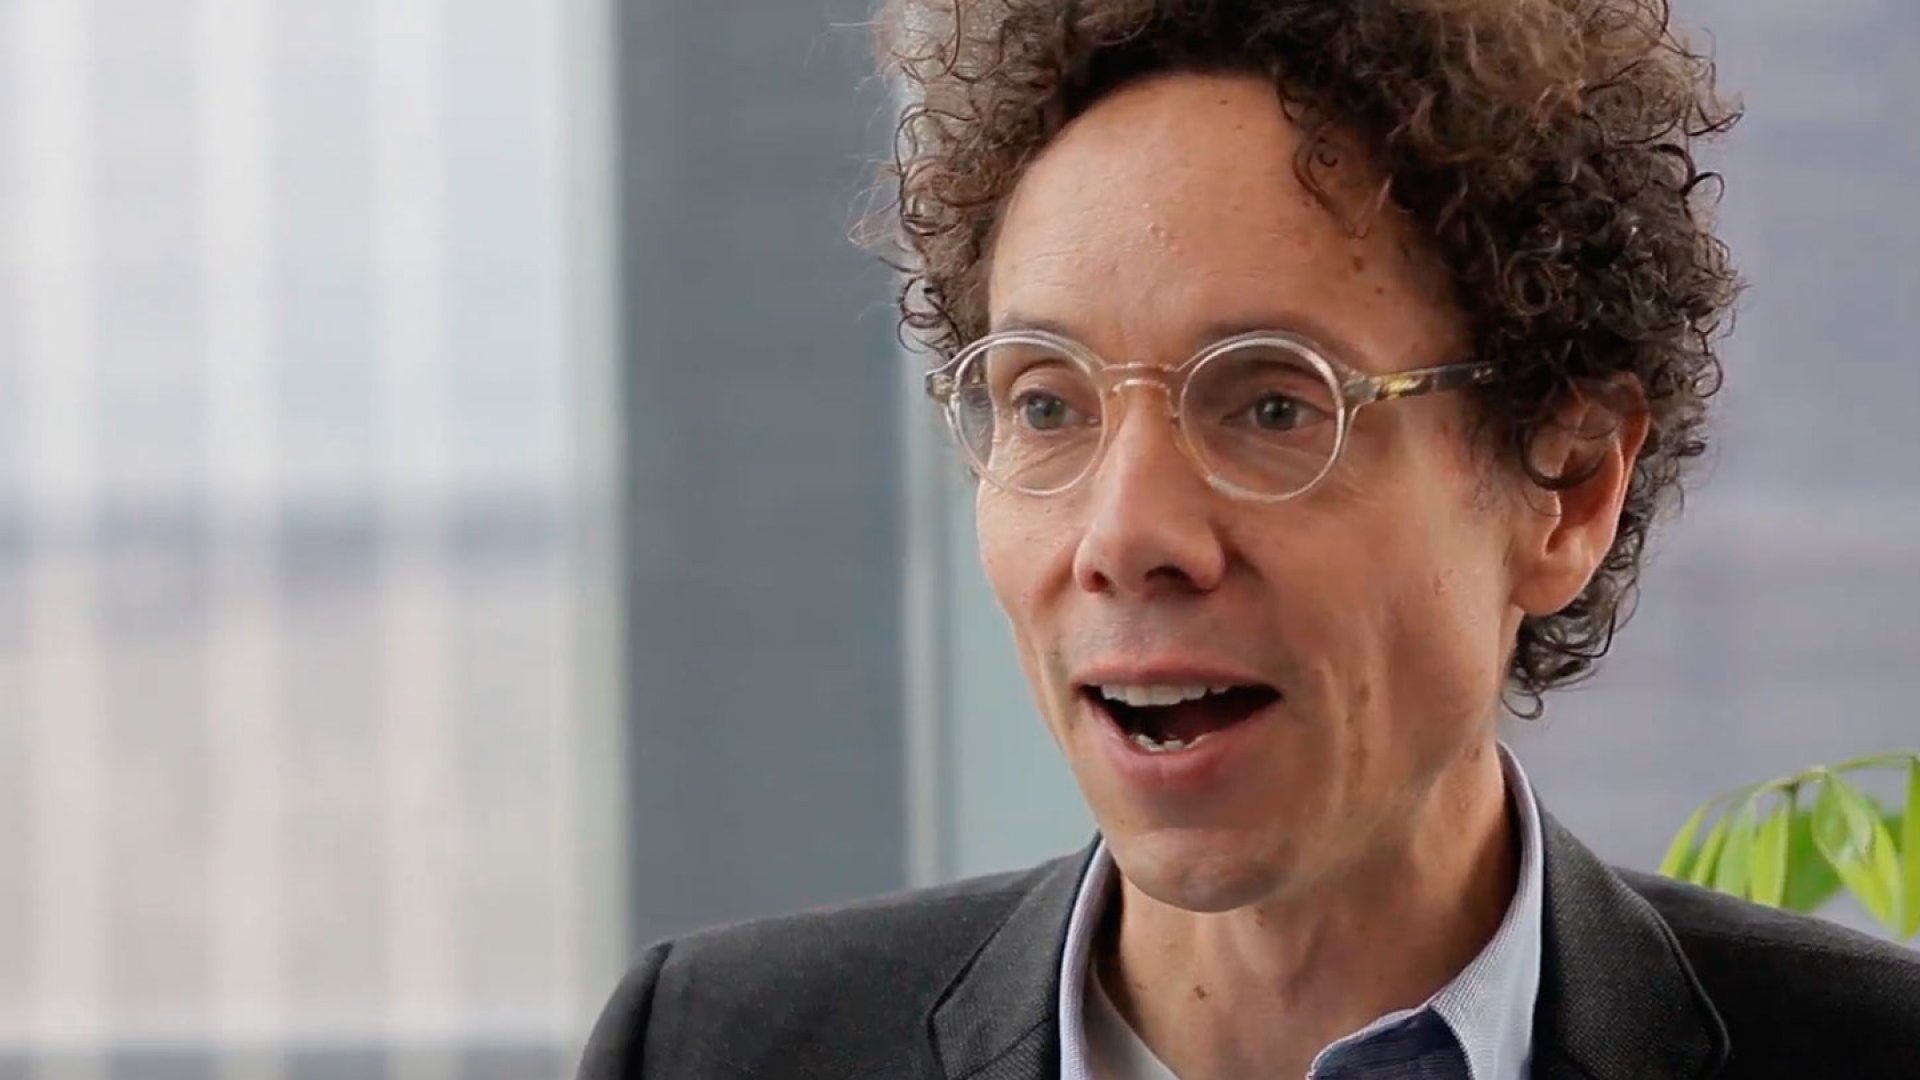 10 Powerful Quotes from Malcolm Gladwell, One of the World’s Most Successful Personal Development Authors